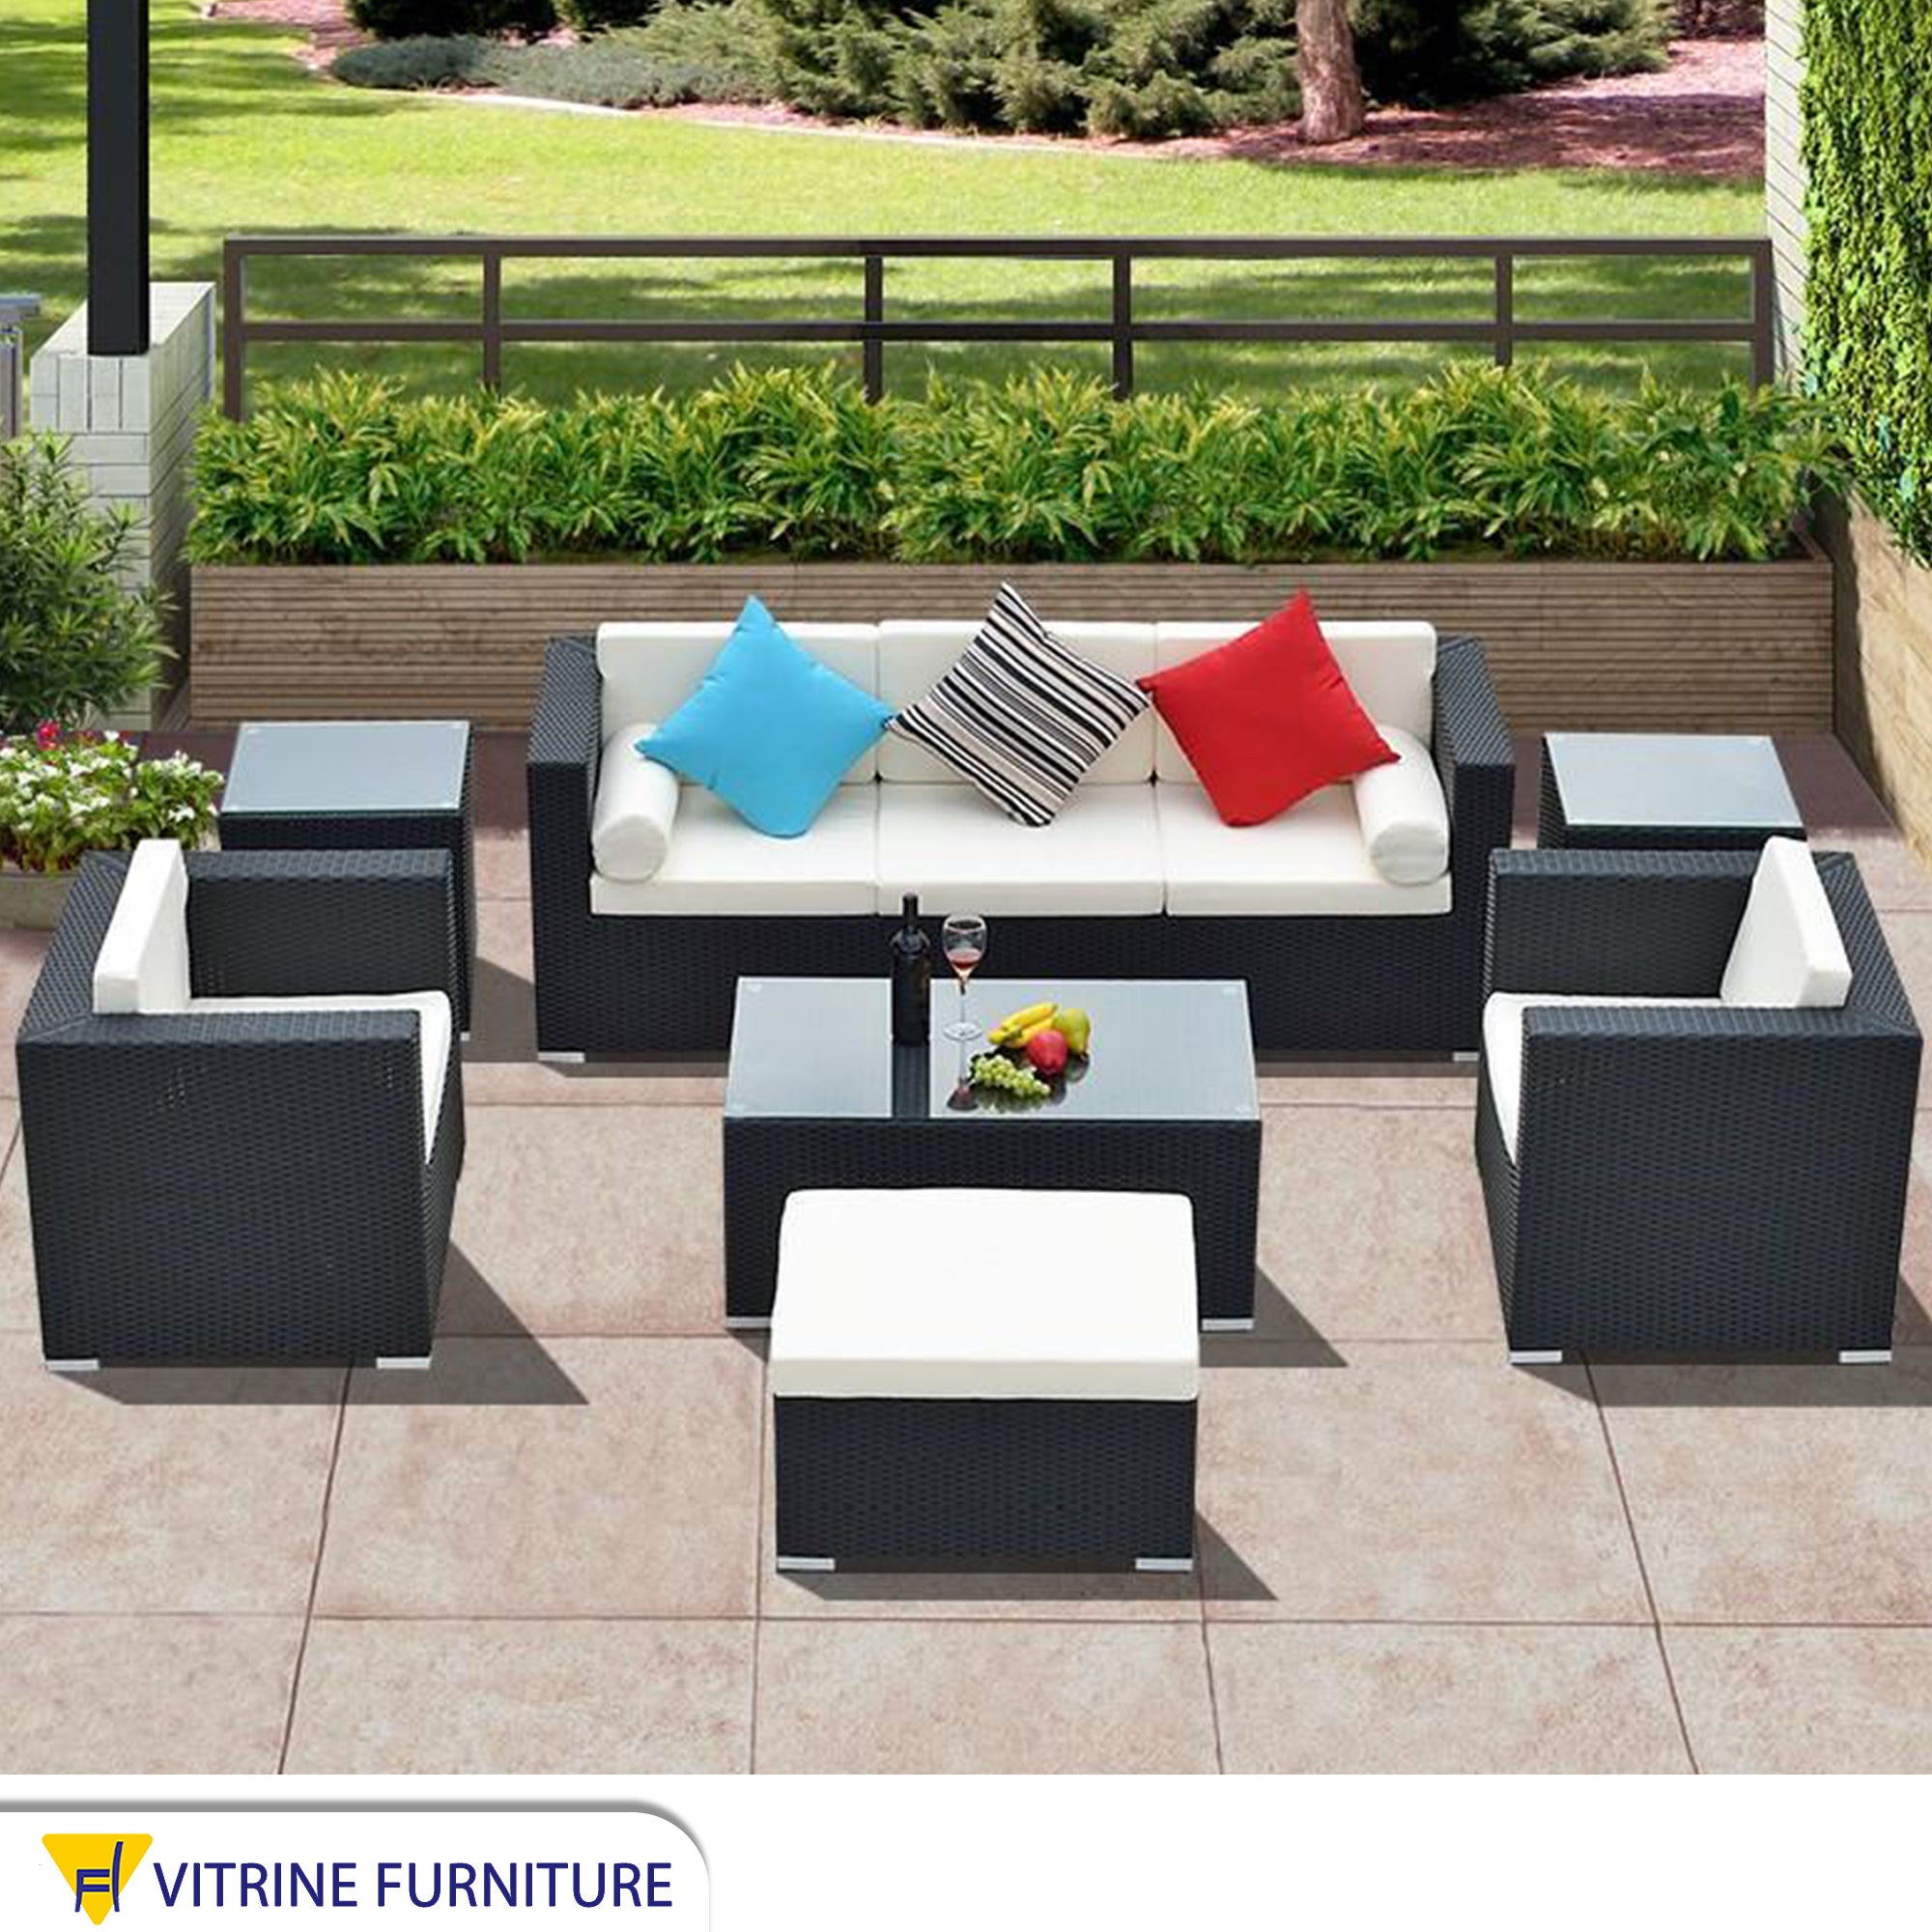 VIP seating set for outdoor spaces